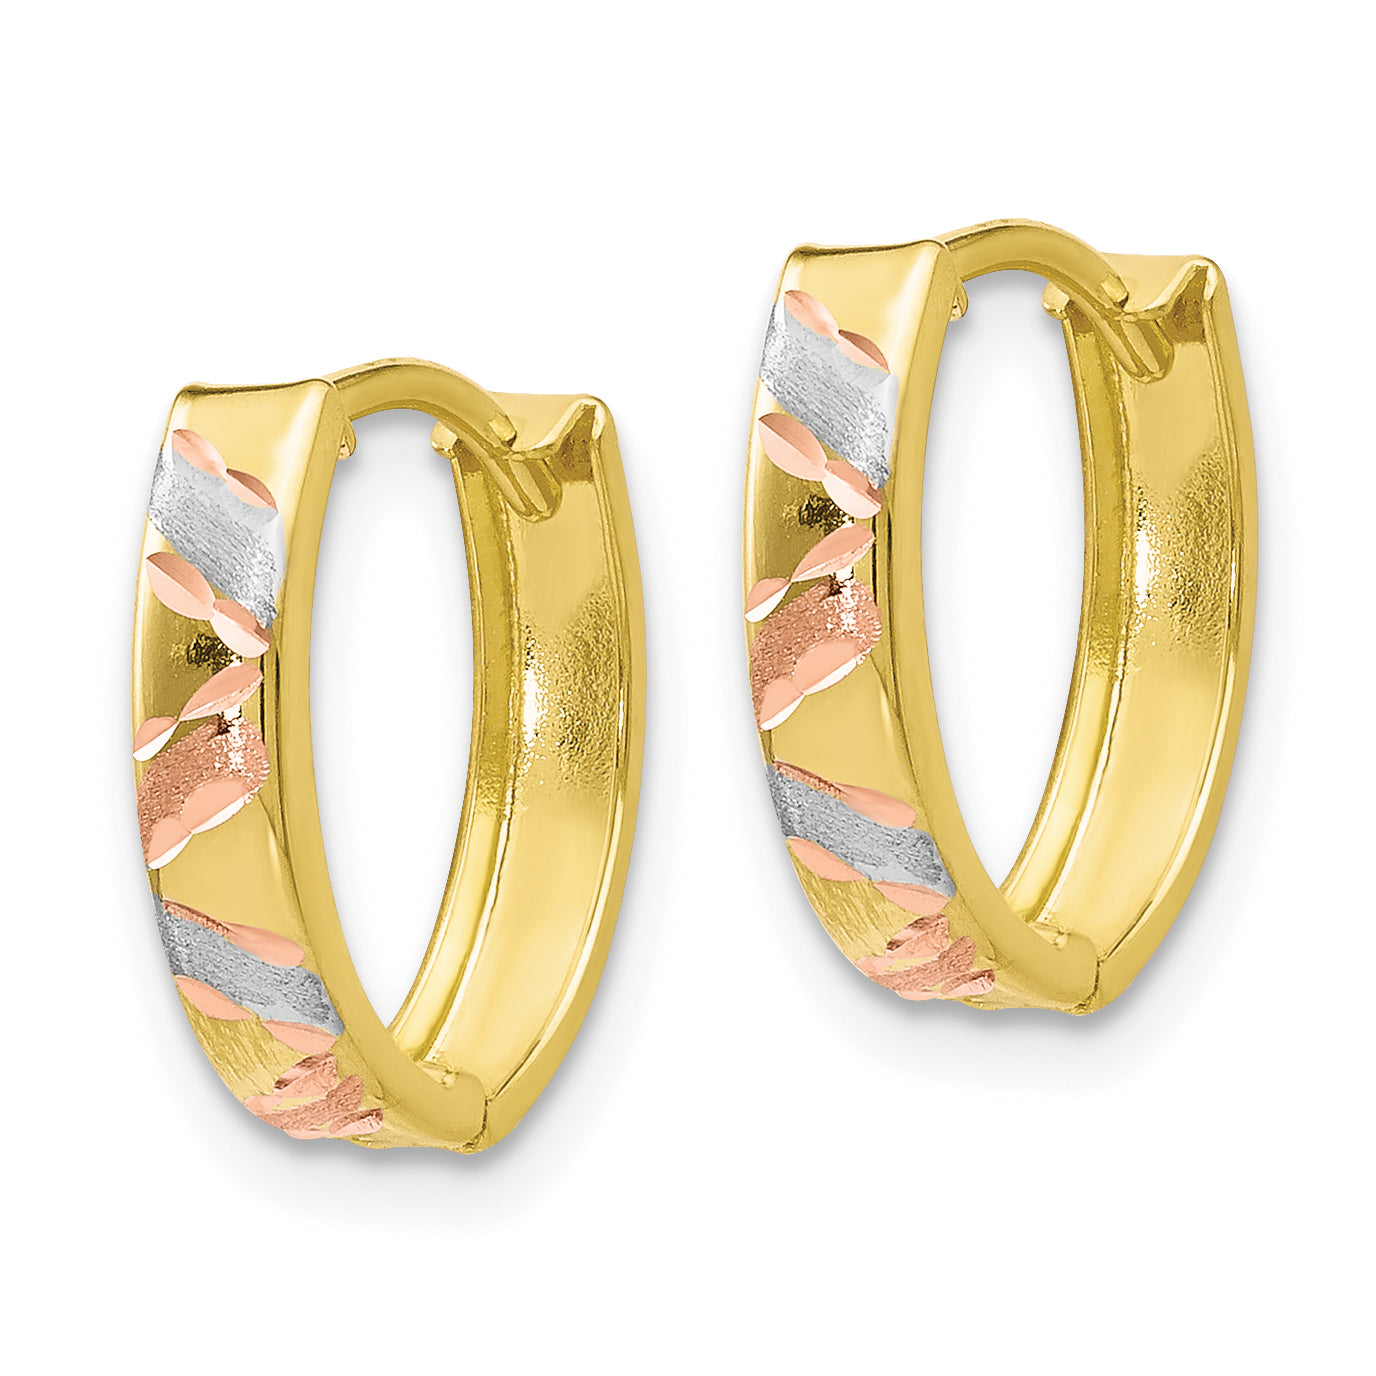 10K Two-tone with White Rhodium Polished and Satin D/C Earrings